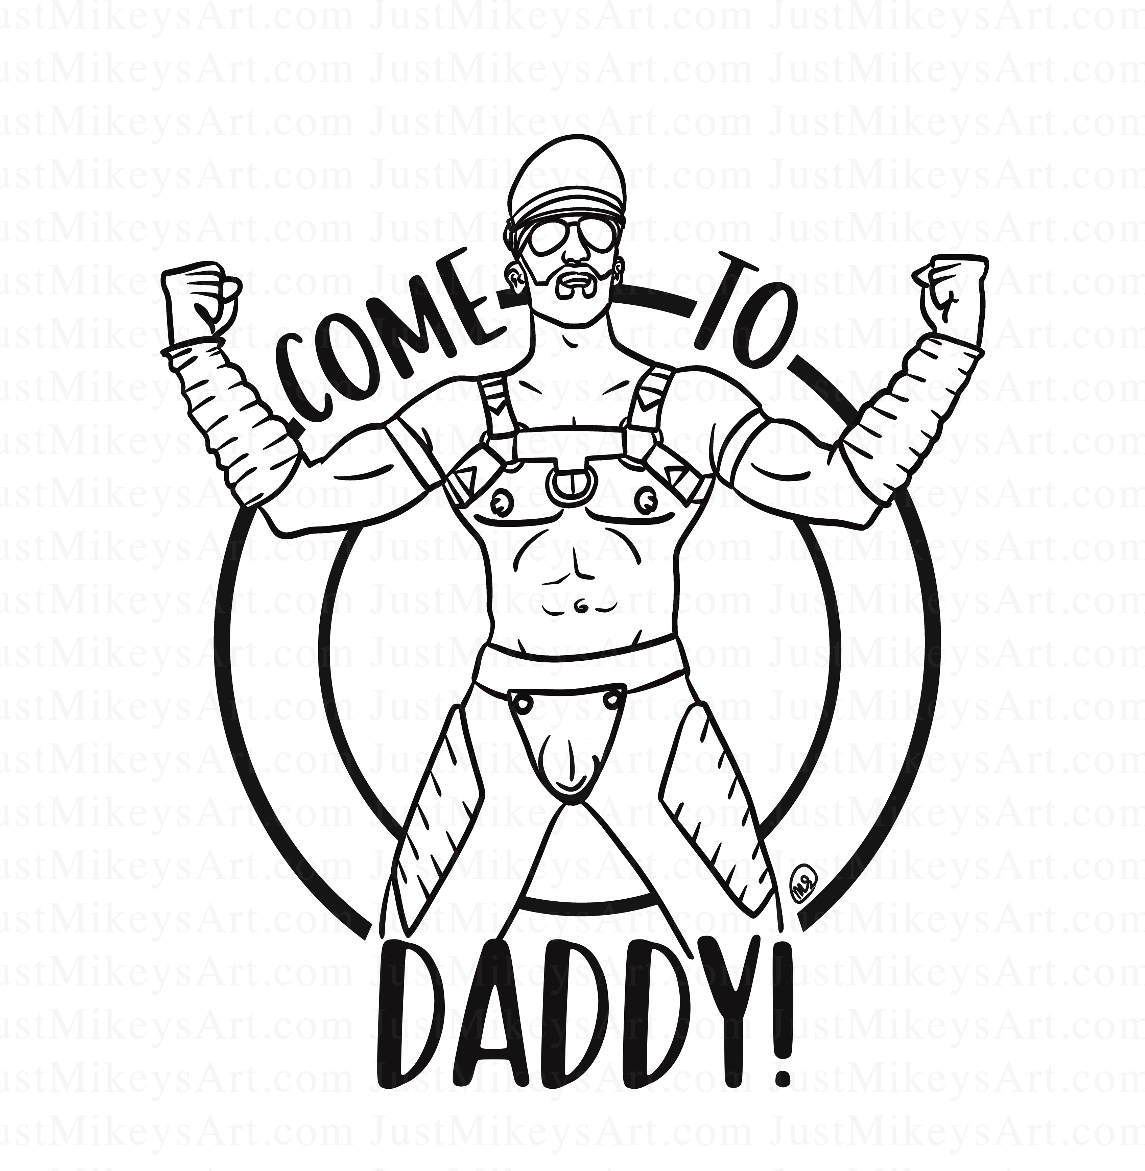 Come to Daddy - Art Print